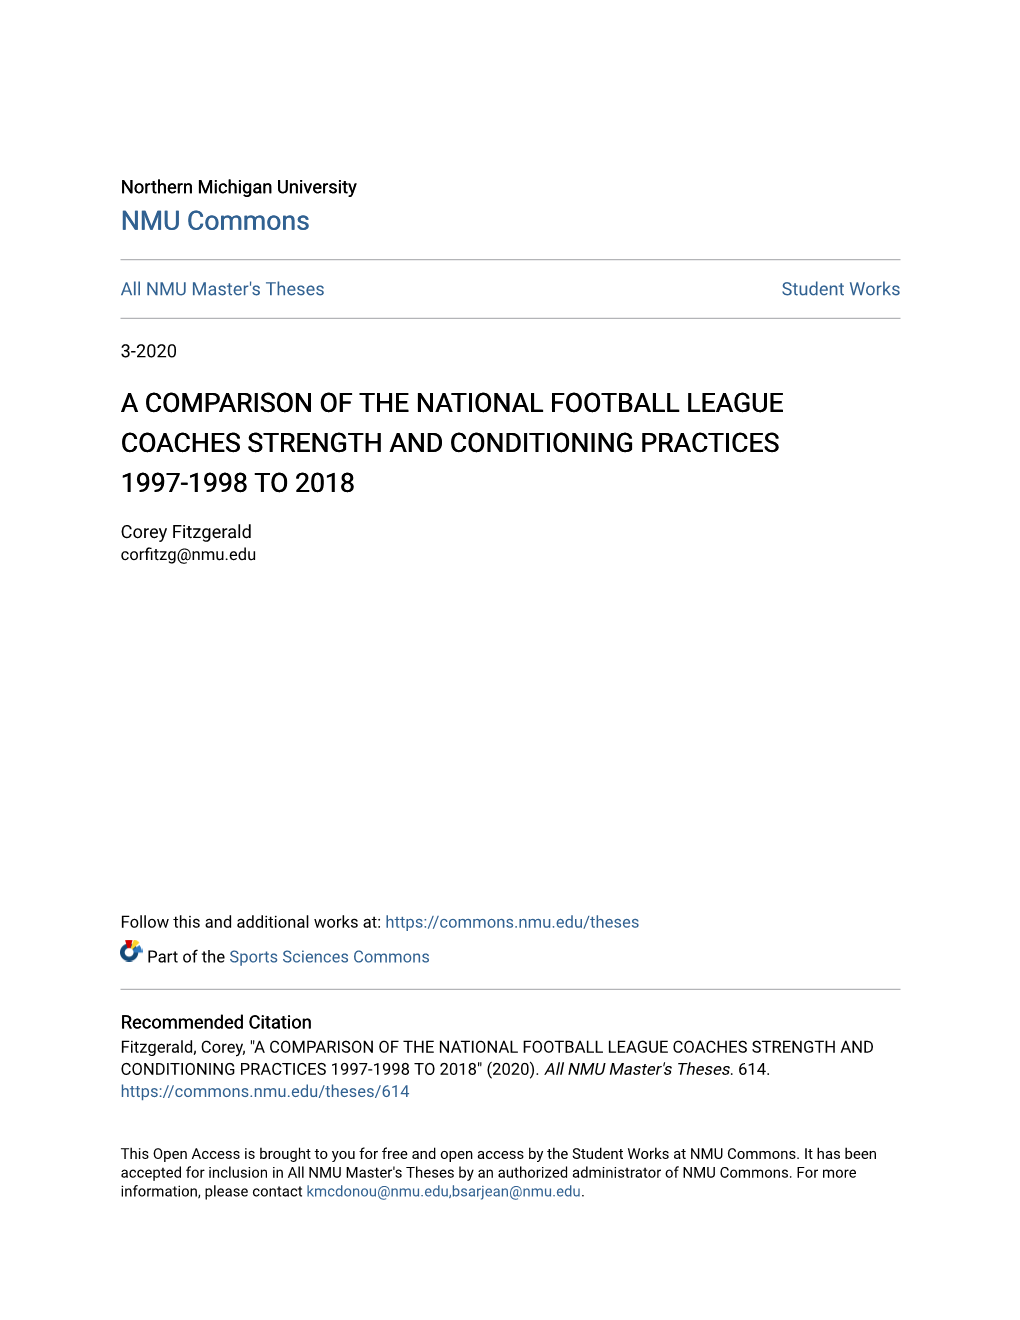 A Comparison of the National Football League Coaches Strength and Conditioning Practices 1997-1998 to 2018